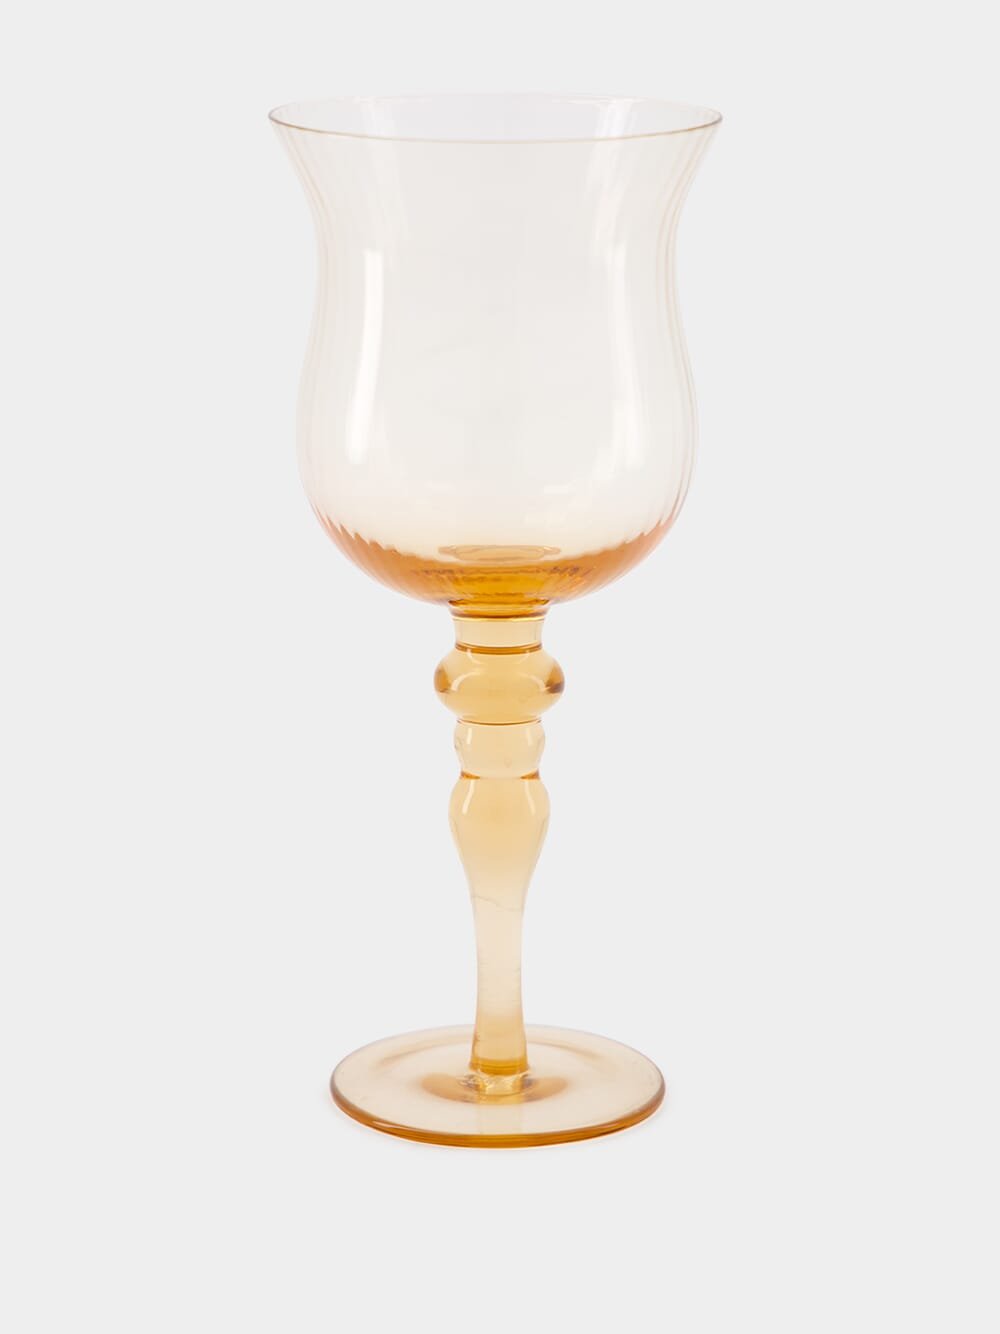 BitossiSet of 6 Diseguale Goblets at Fashion Clinic